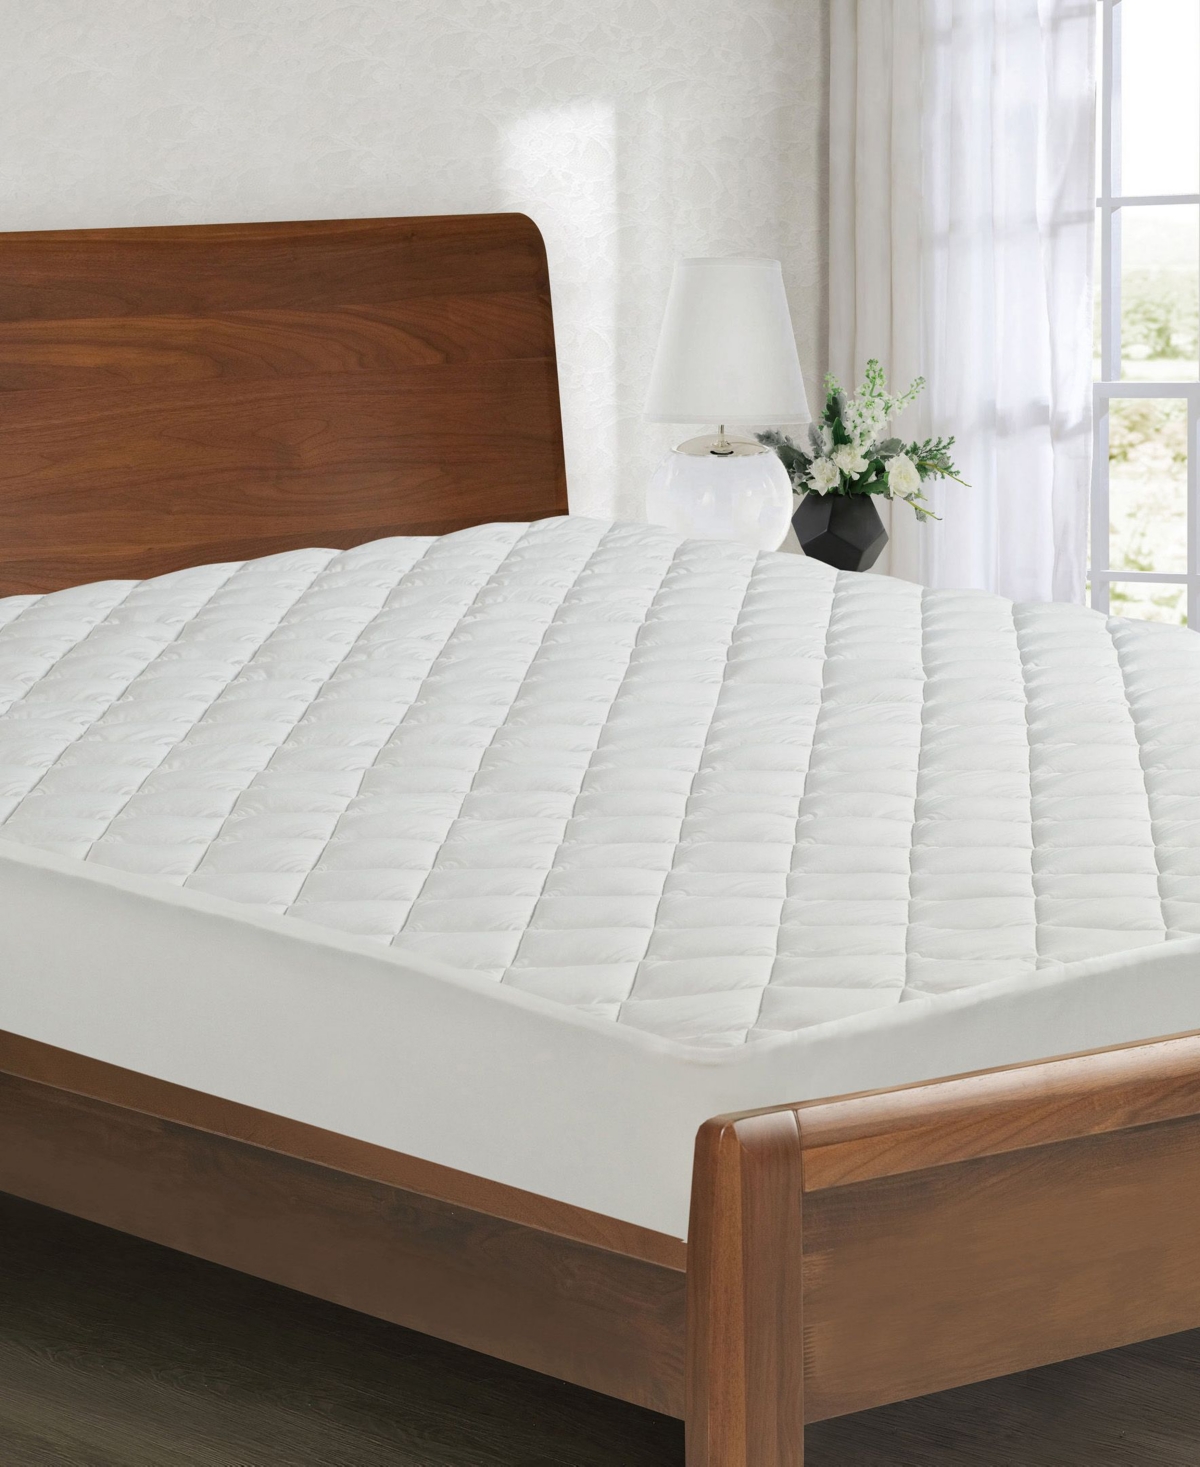 All-In-One All Season Reversible Cooling Warming Fitted Mattress Pad, Full